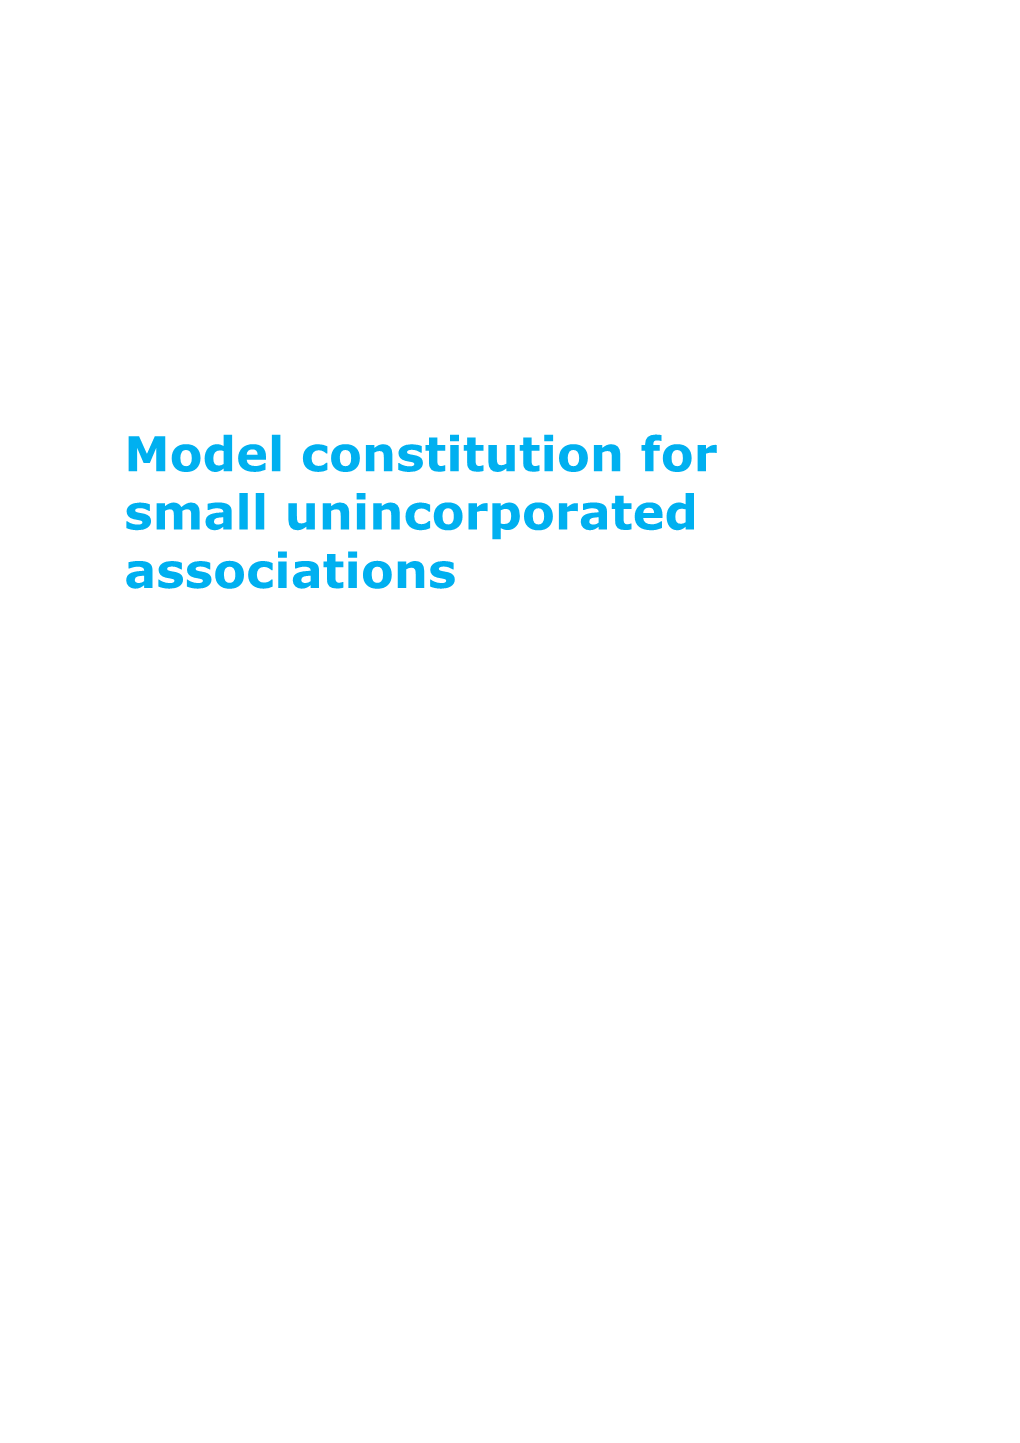 Model Constitution for Small Unincorporated Associations